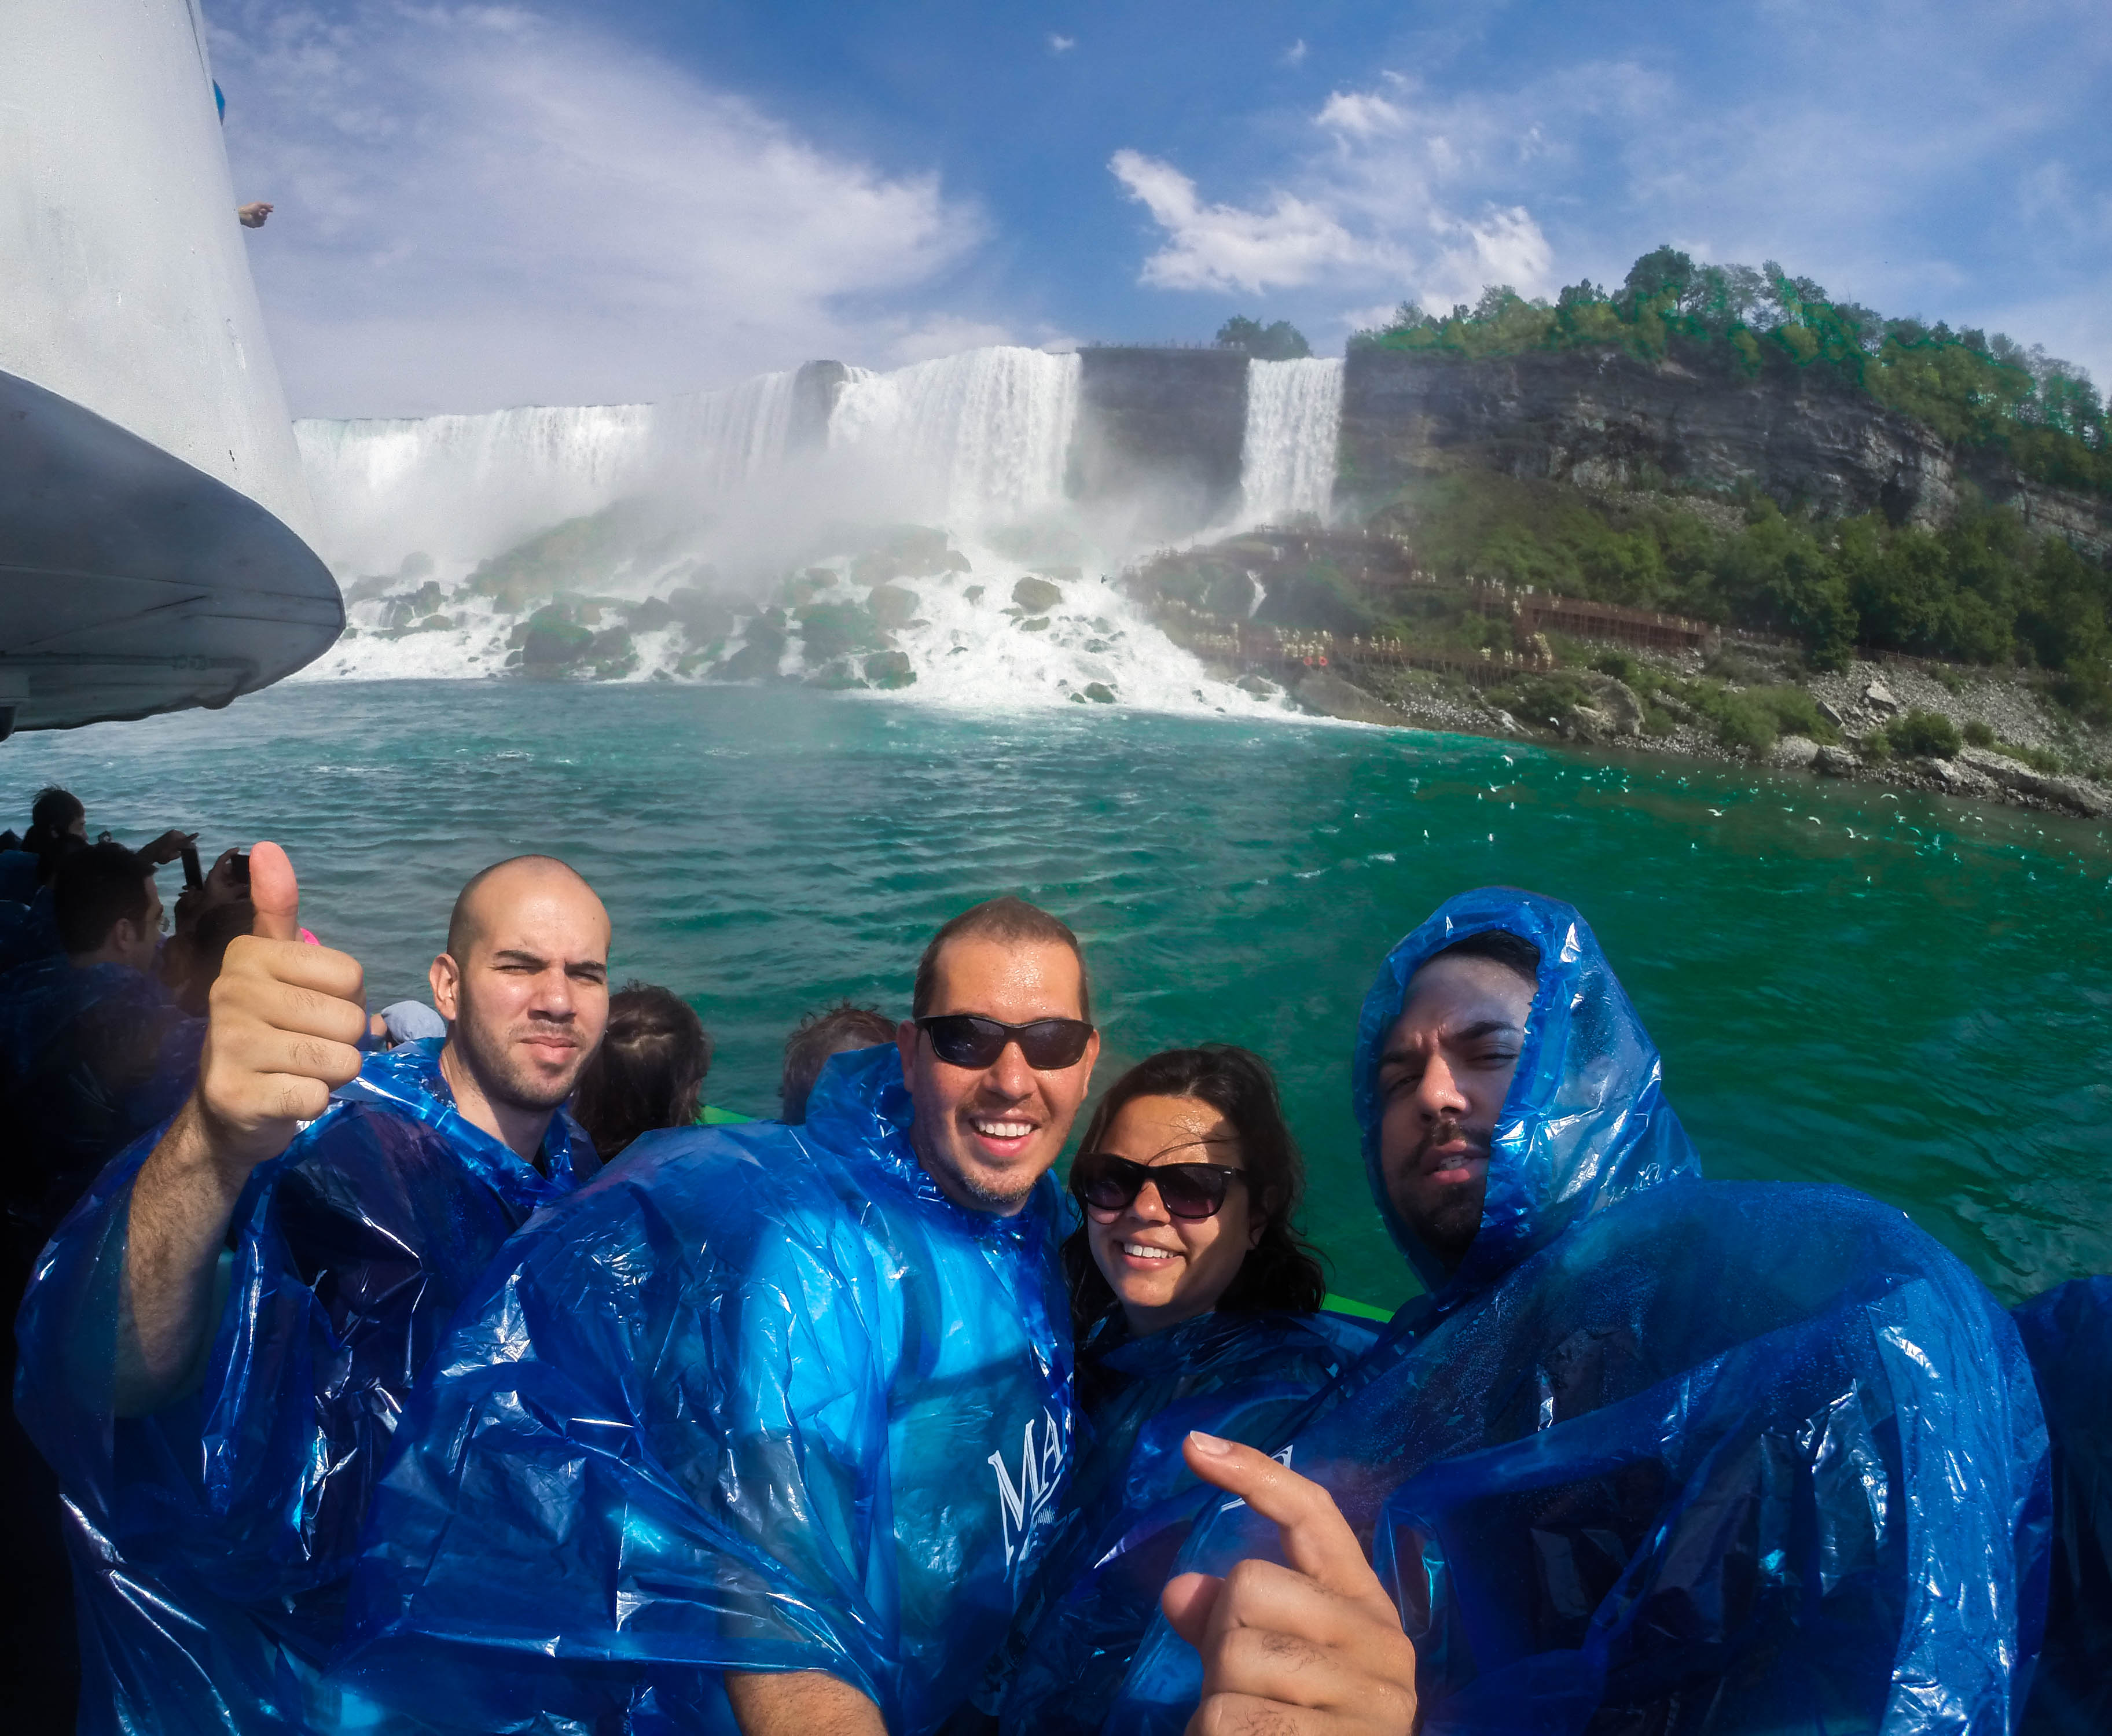 Awesome experience on the Maid of the Mist